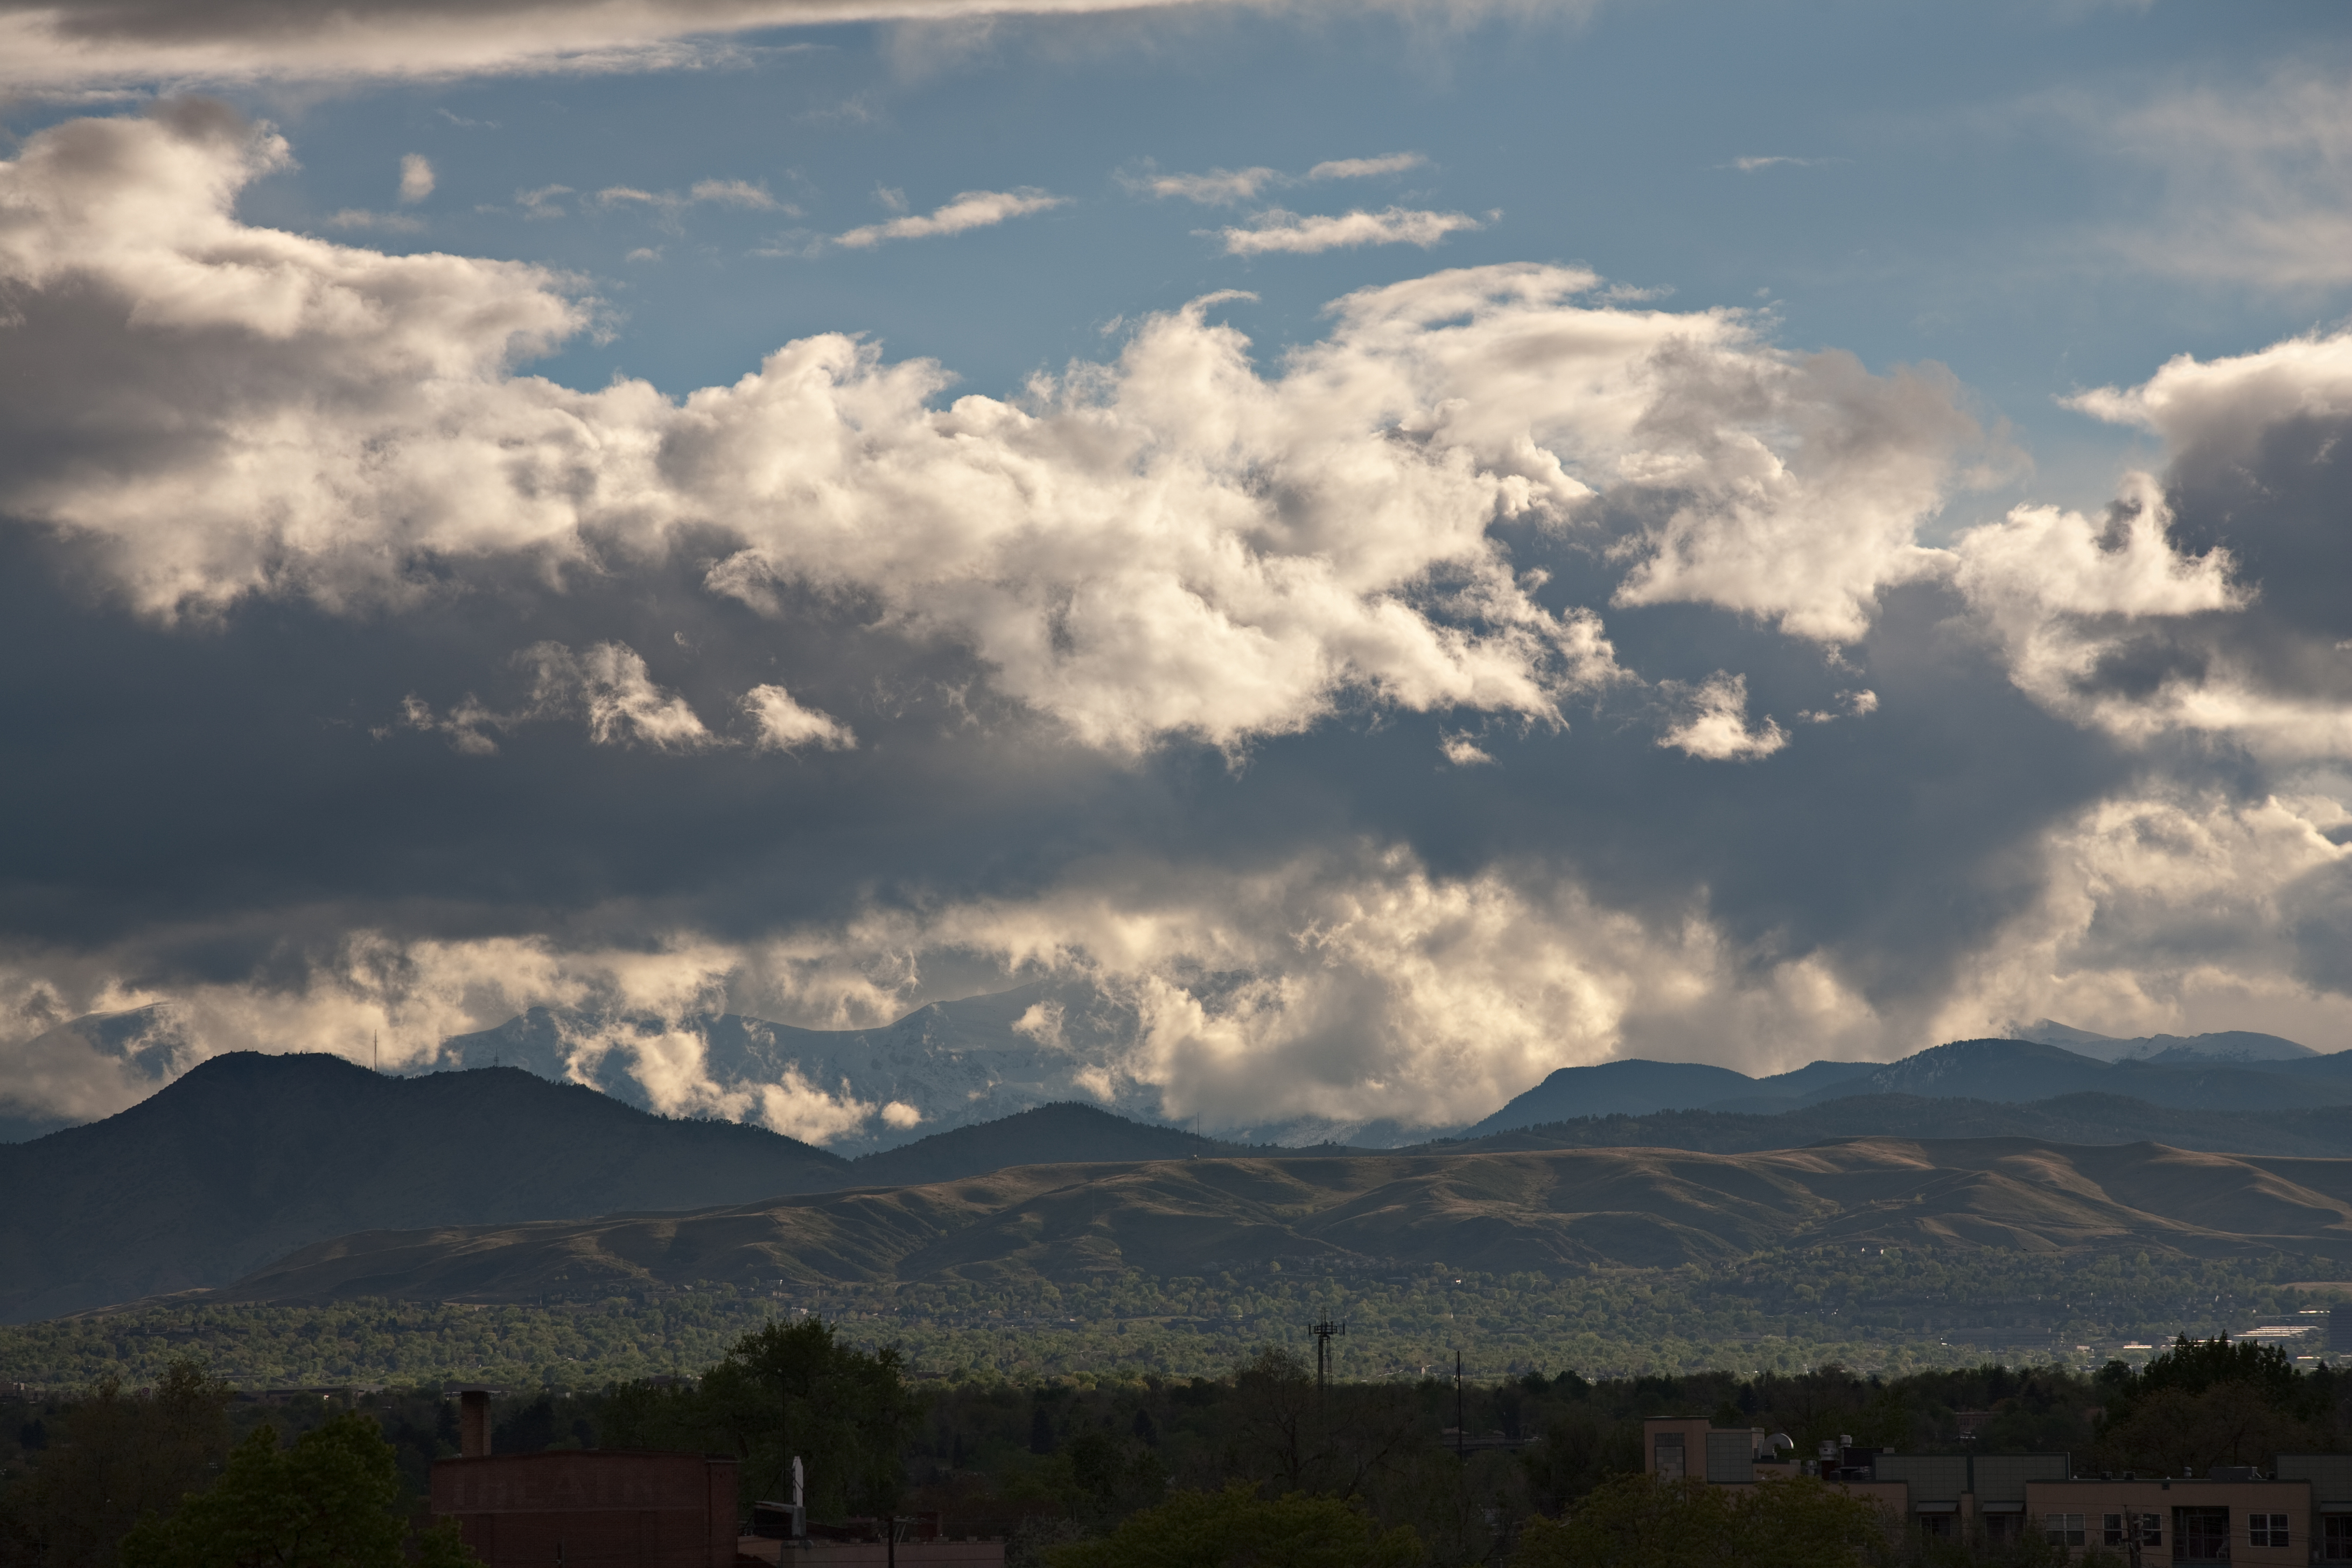 Mount Evans obscured - May 20, 2011